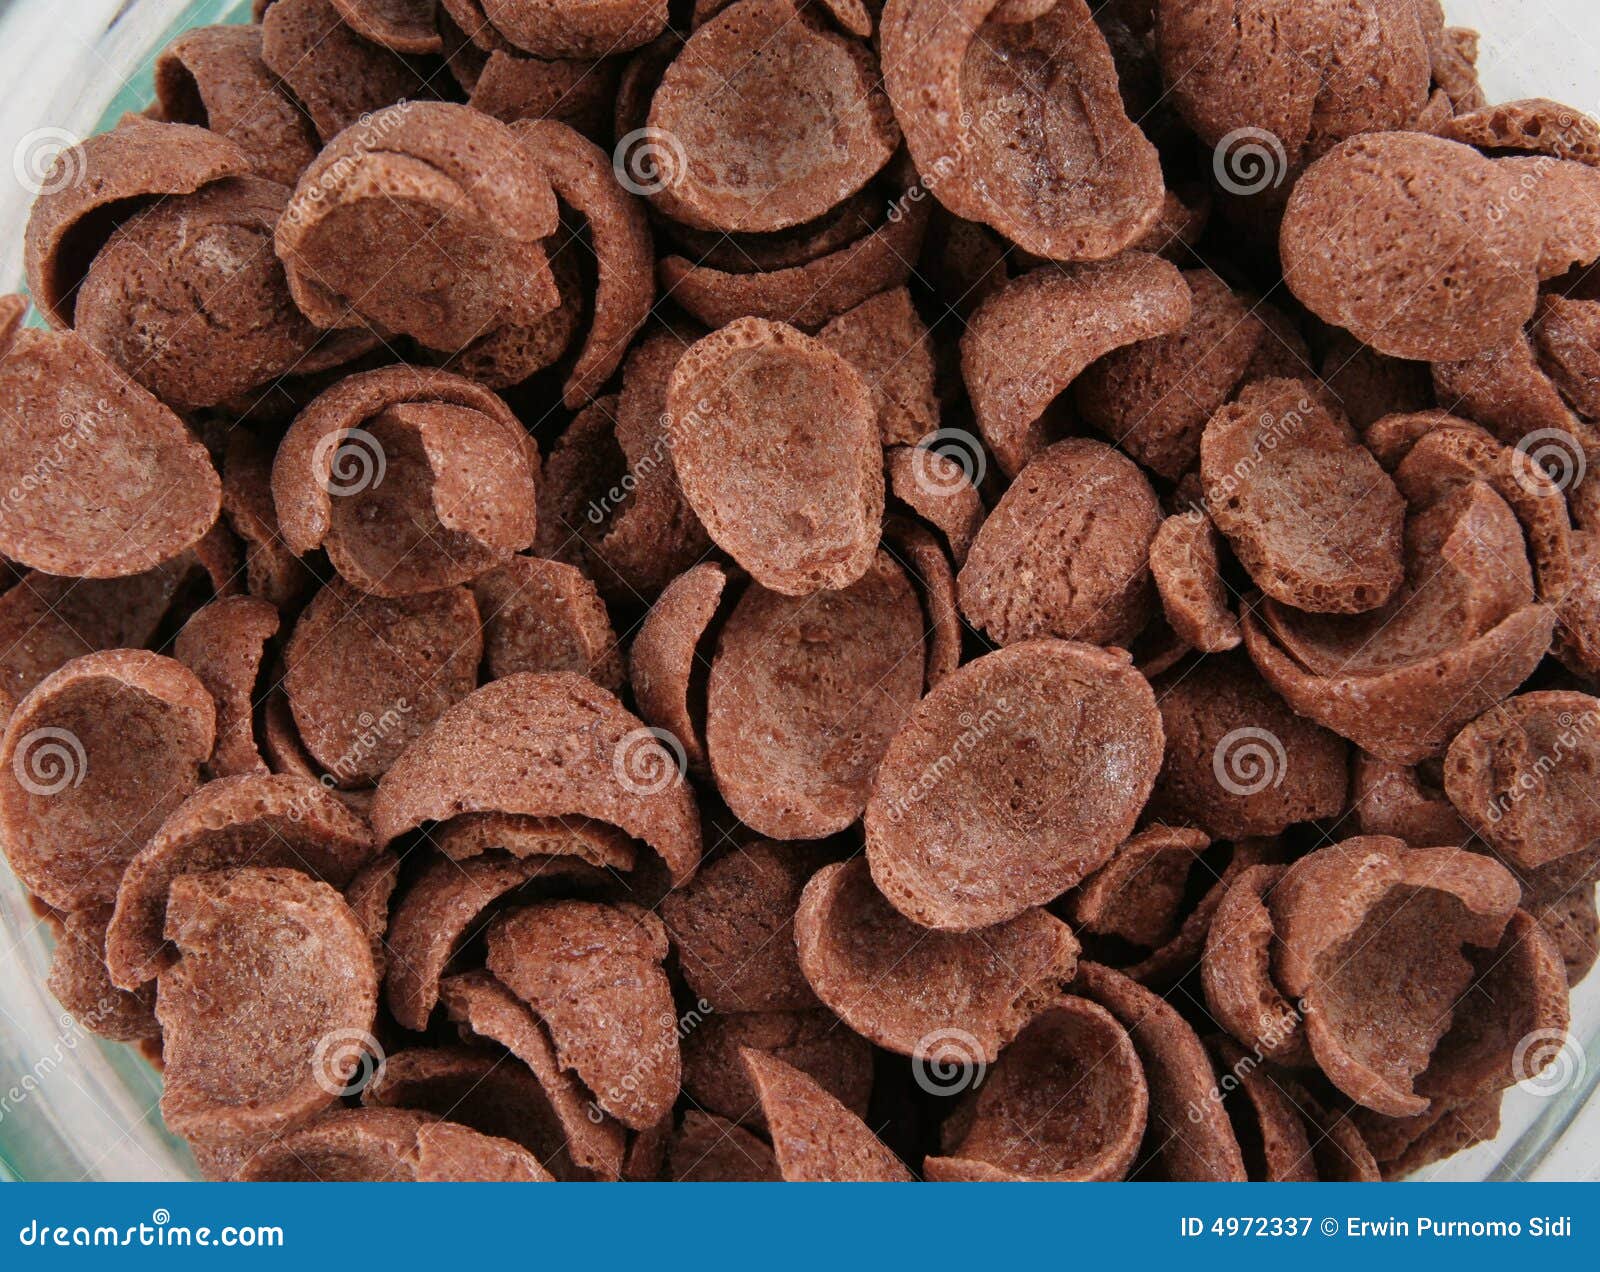 Choco flakes stock image. Image of flakes, chocolate, frosted - 4972337